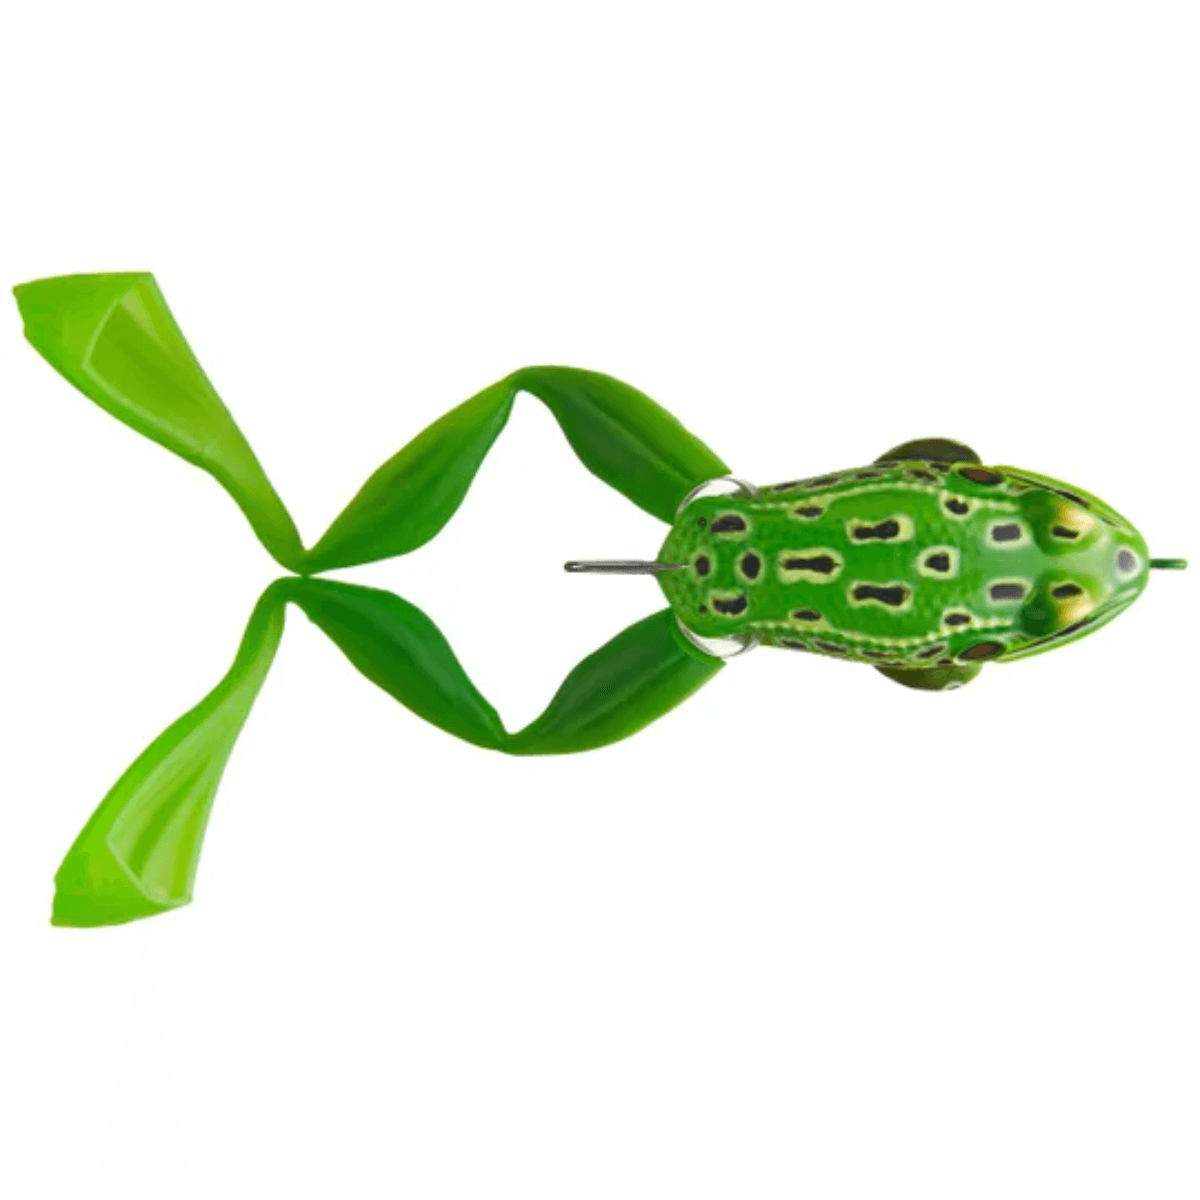 LiveTarget Ultimate Finesse Frog - 2' - Green/Yellow